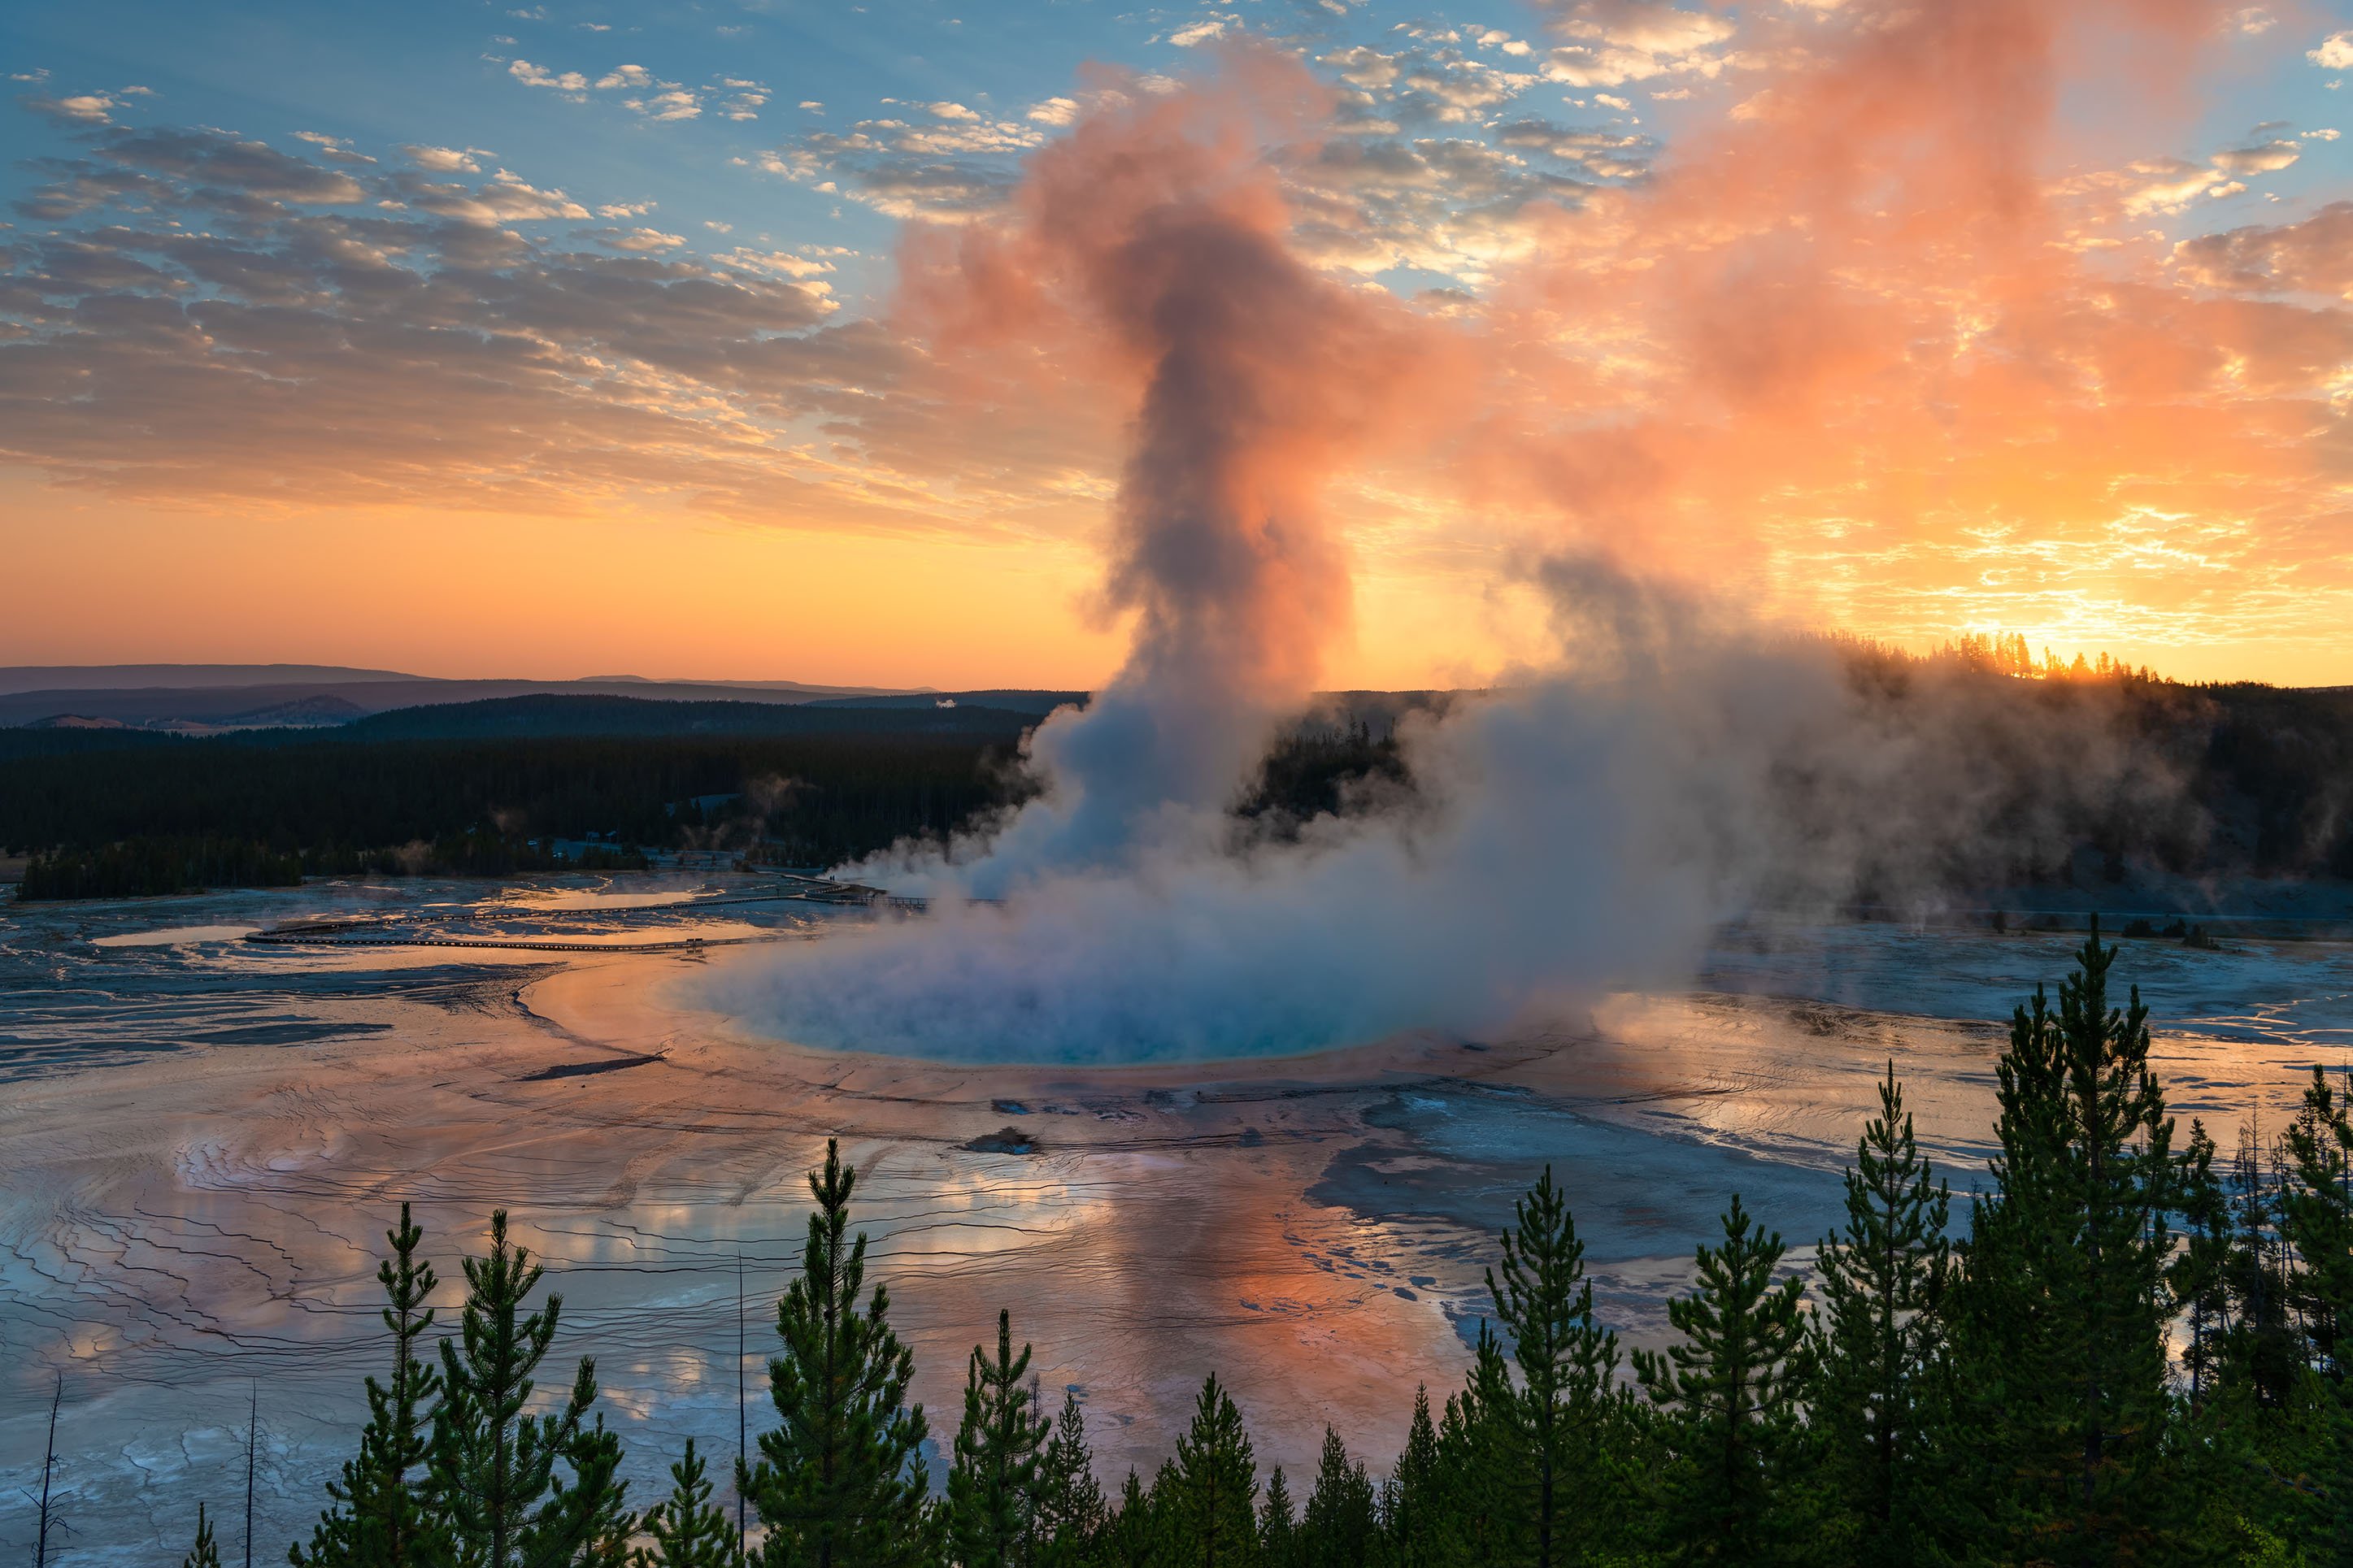 Colorful sunset with a geyser in Yellowstone National Park.